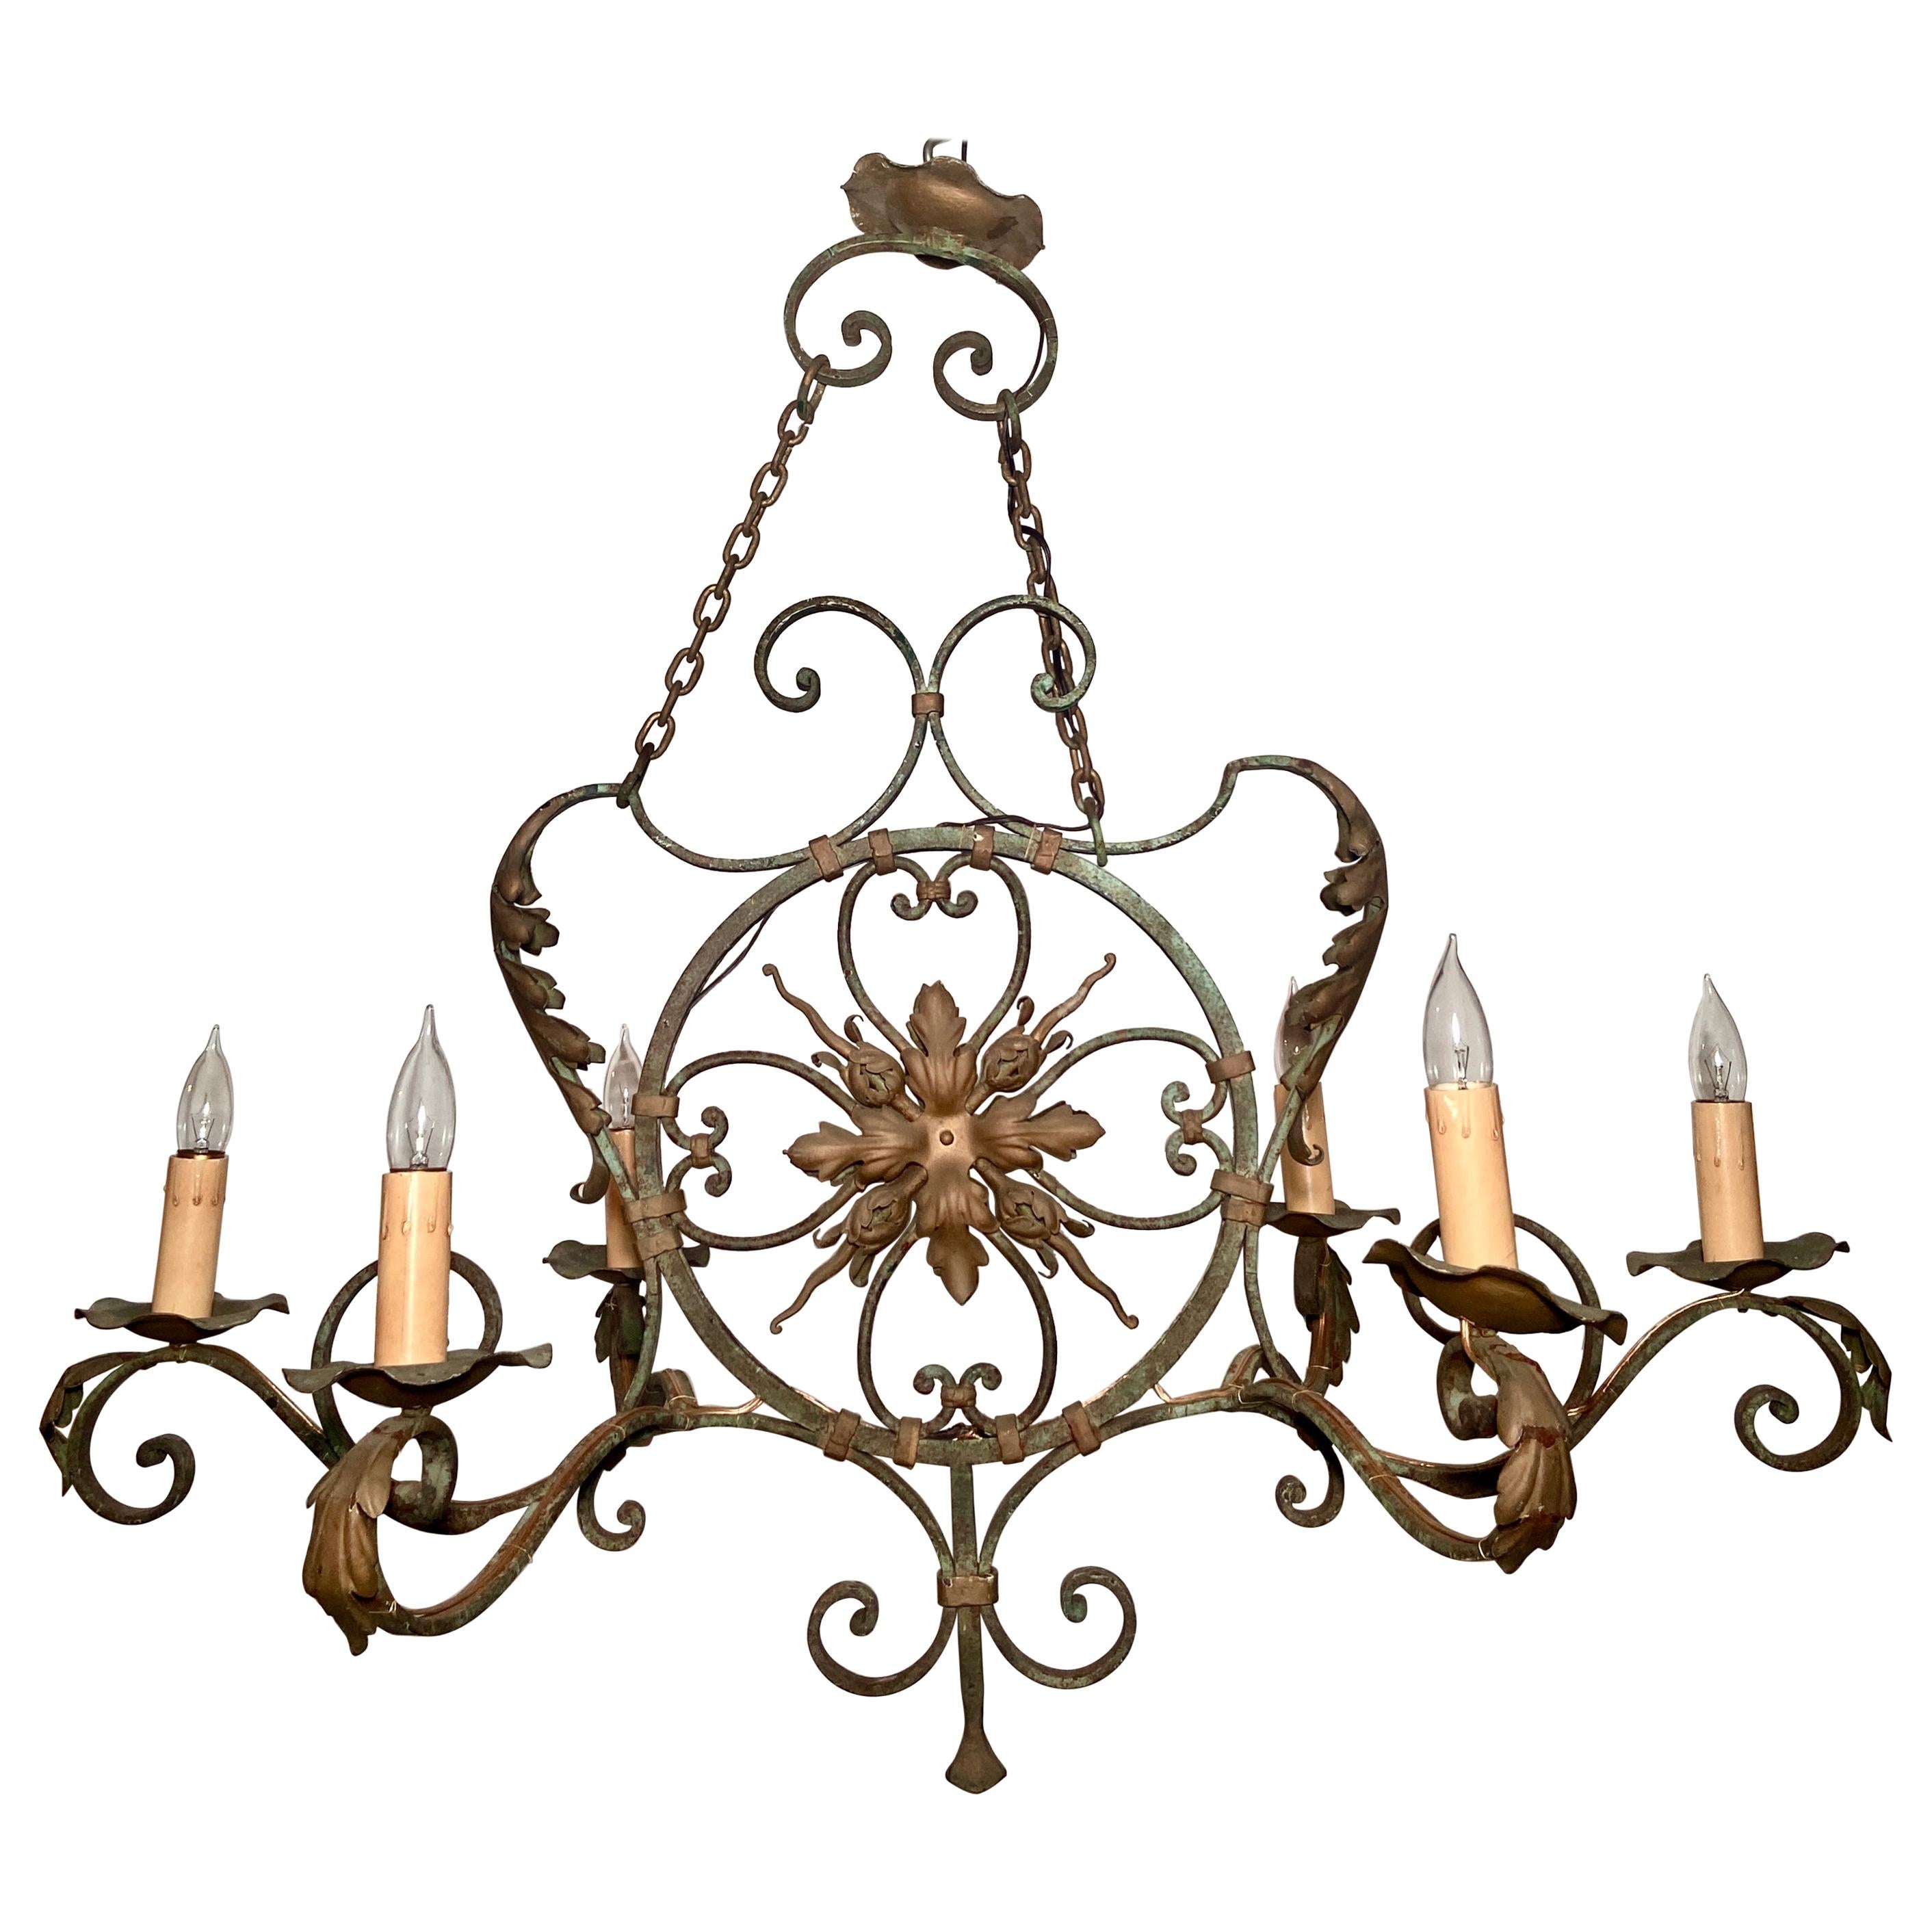 Antique 19th Century French Wrought Iron 6 Light Chandelier For Sale